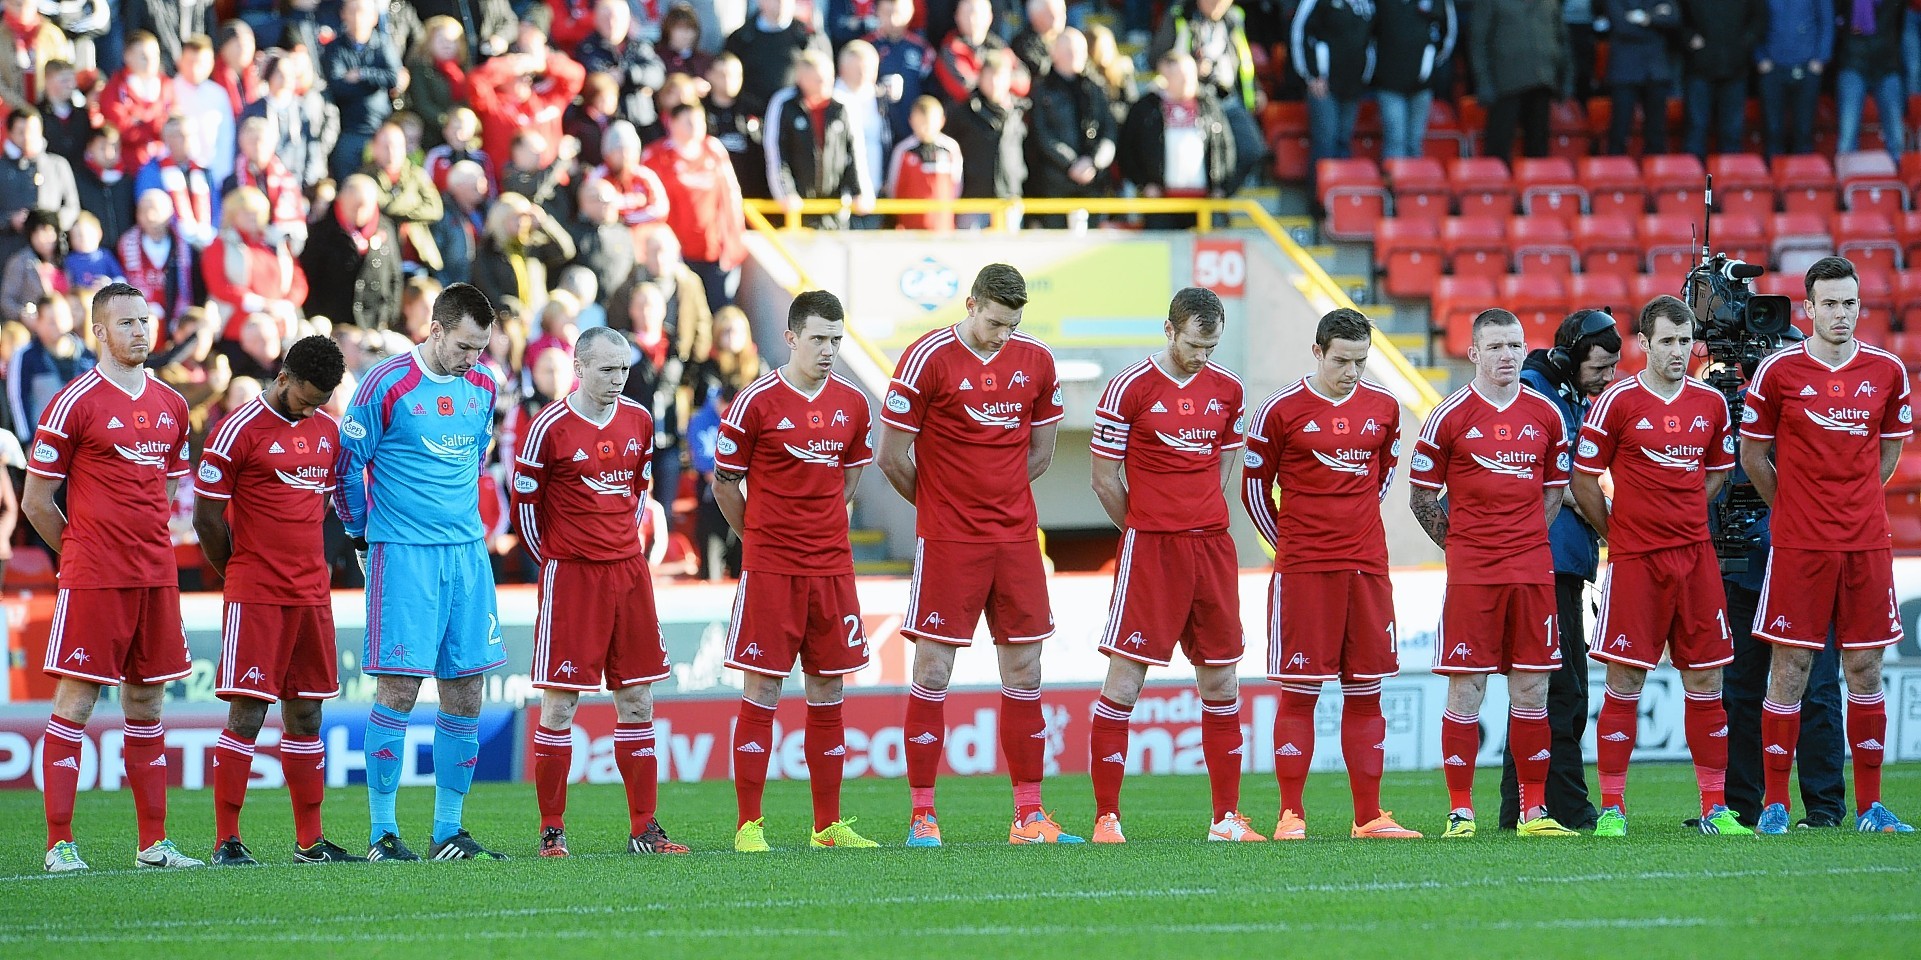 Aberdeen players observe the minute silence at Pittodrie